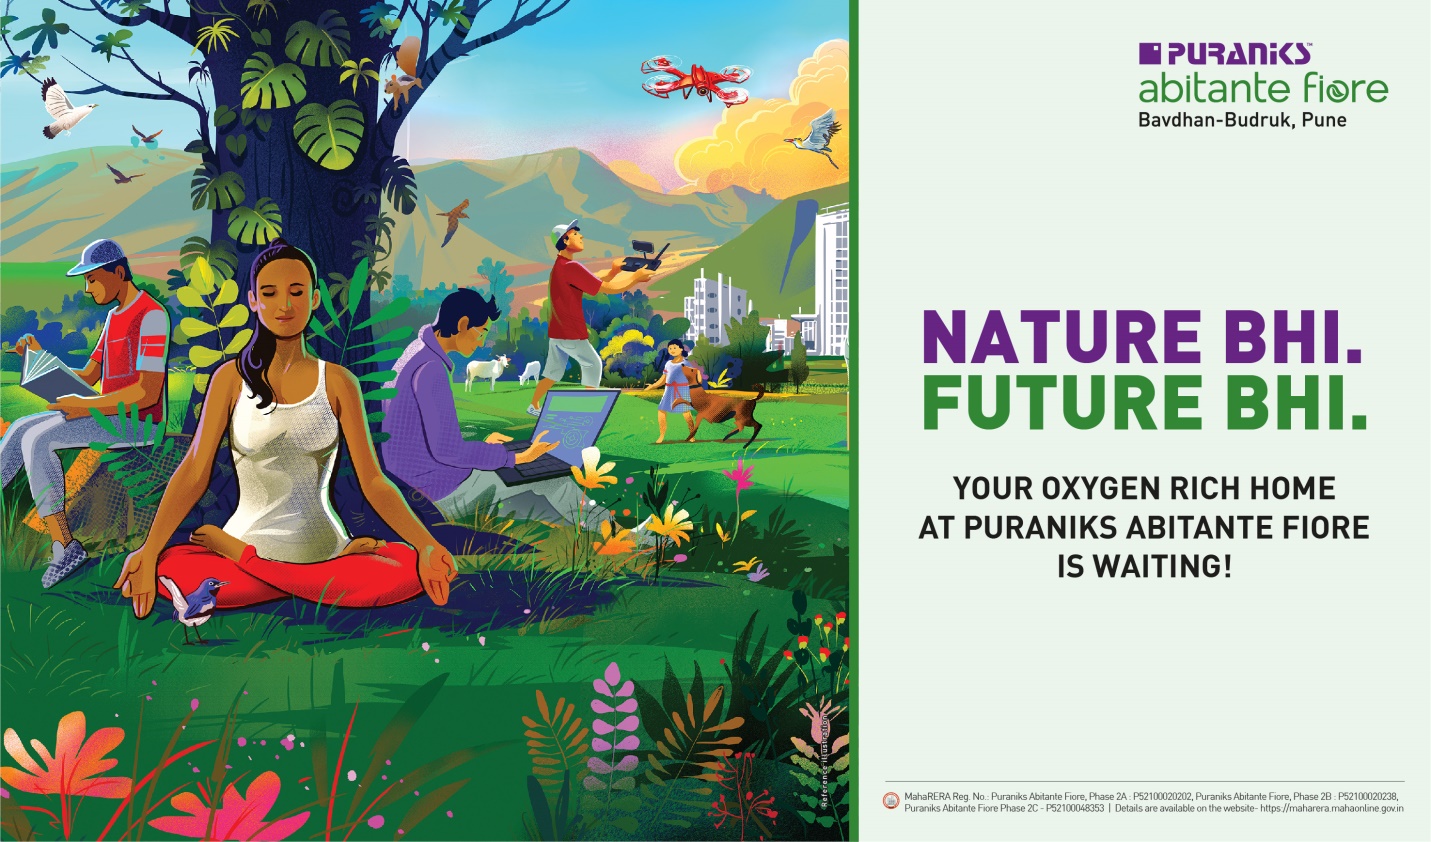 Your oxygen rich Home at Puraniks Abitante Fiore is waiting!